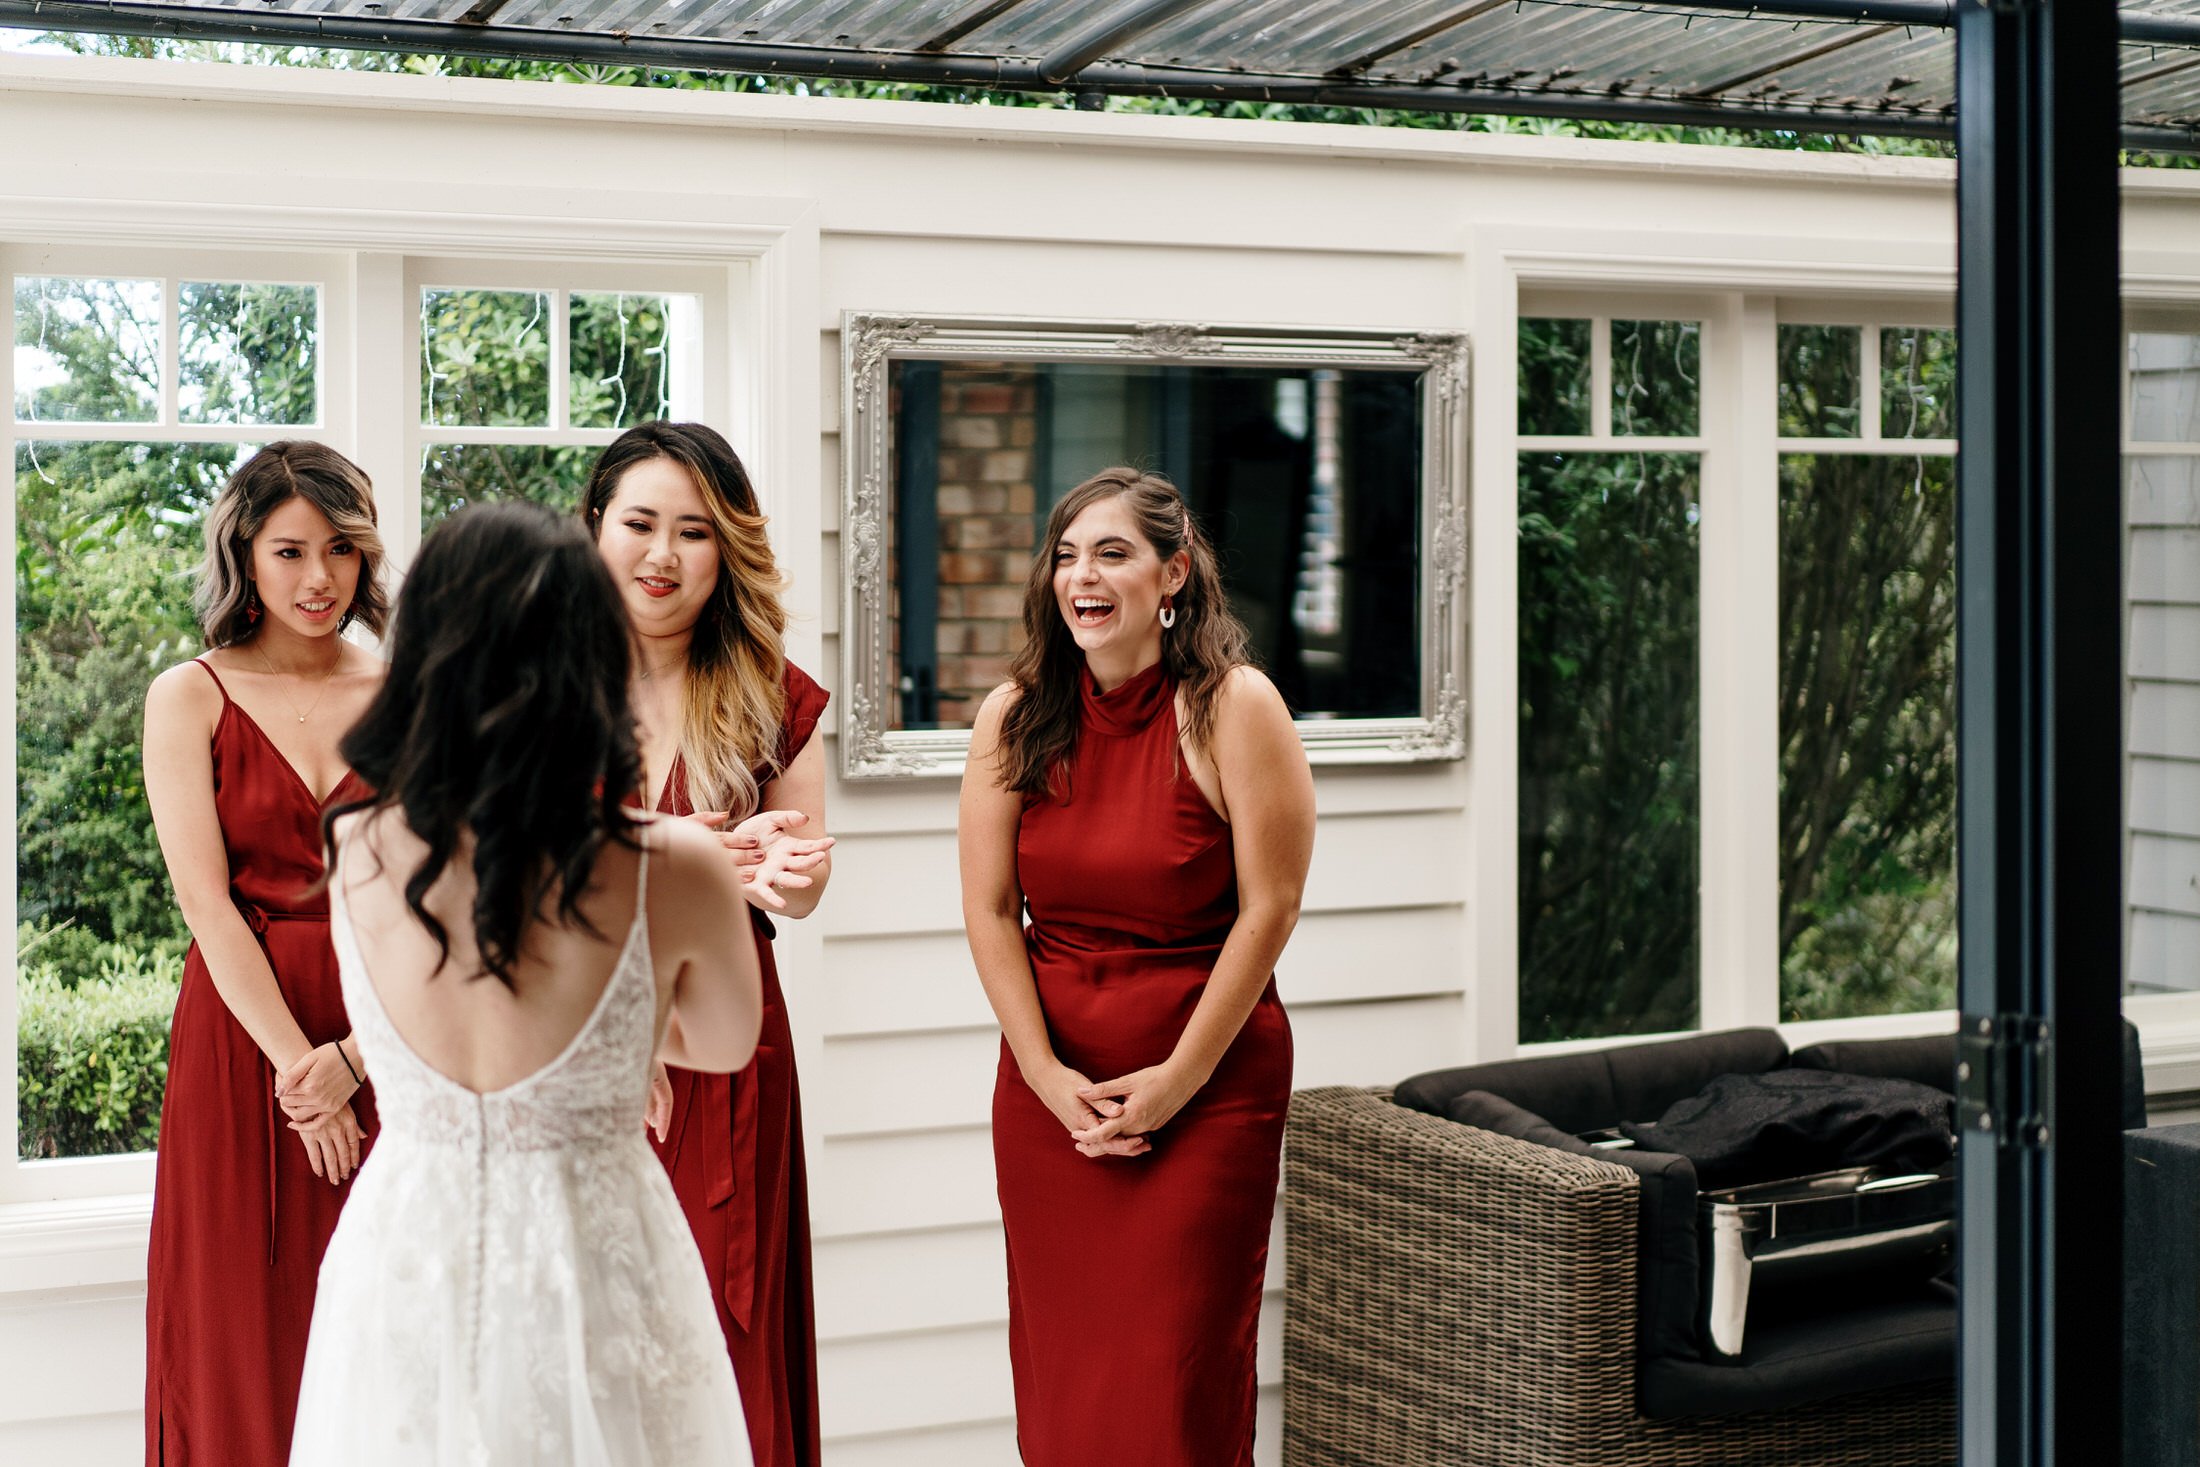 Auckland Wedding Photography &amp; Videography | Luxury Wedding Venue | Forest Wedding | South Auckland Wedding Venue | DIY Wedding | Hedges Estate Wedding